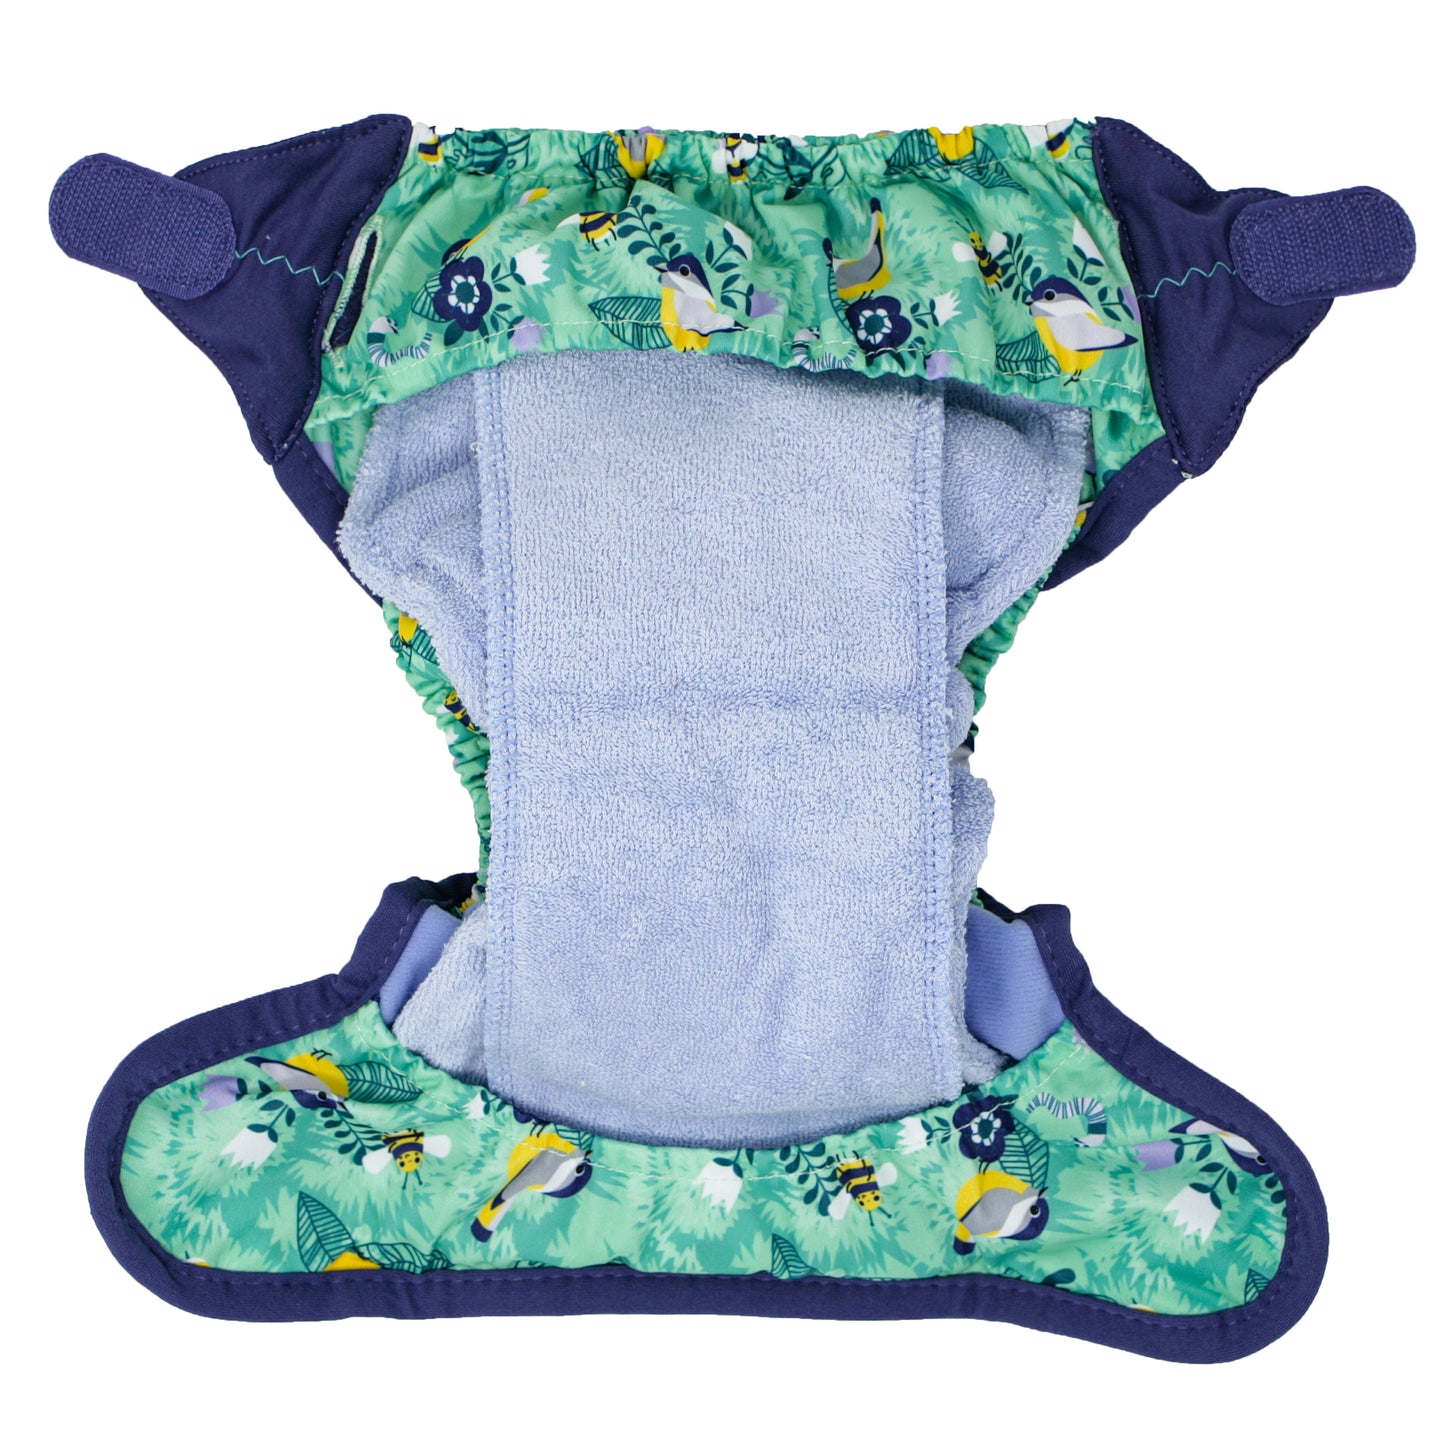 Inside Of Green Blue Pop-in One Size Around The Garden Reusable Cloth Nappy, With Velcro Fastening